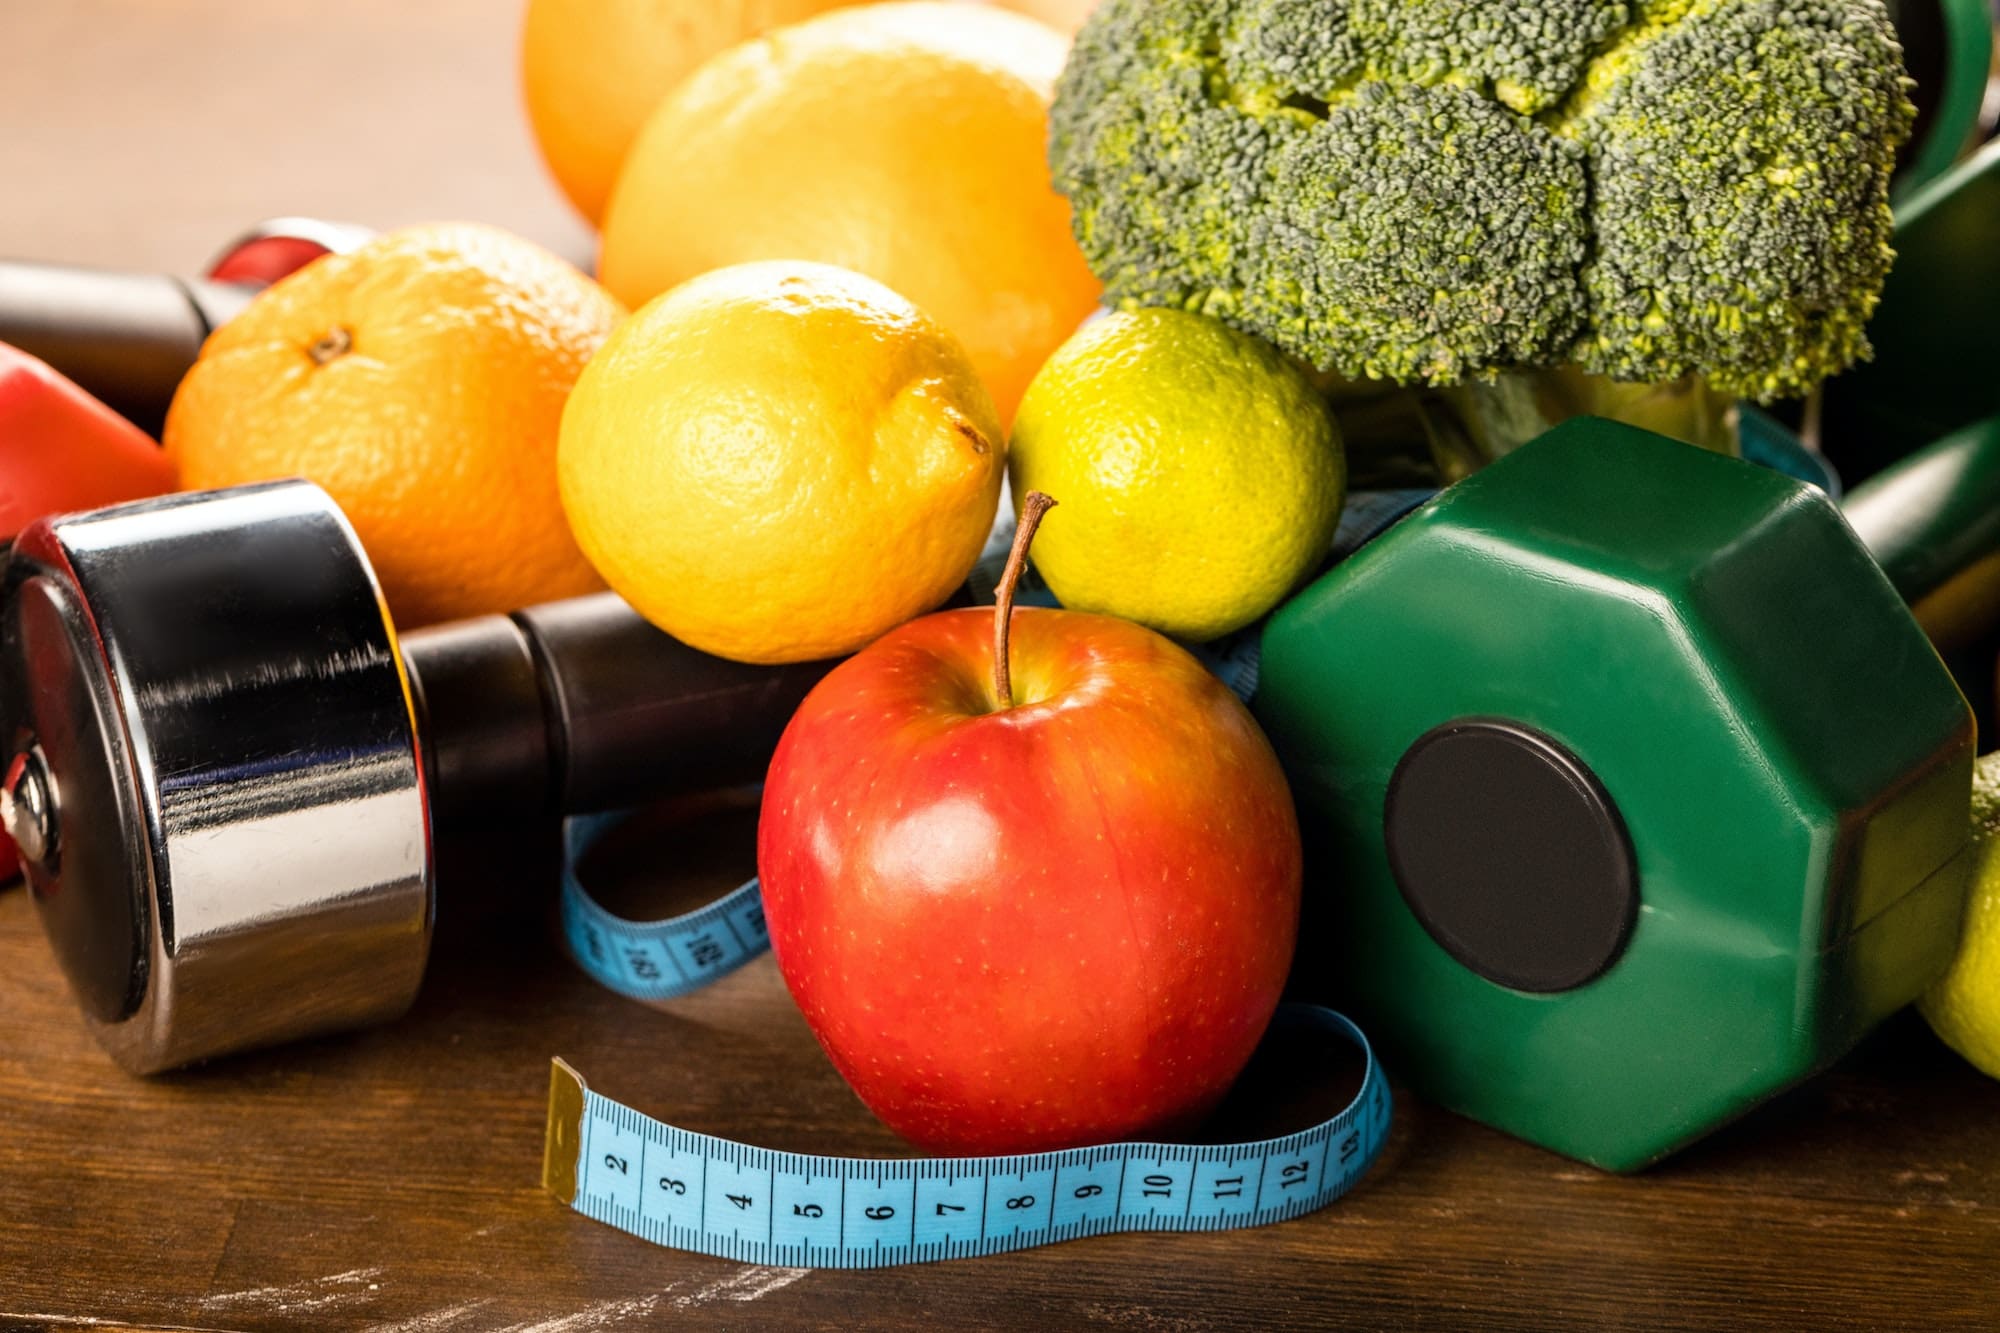 close up view of healthy food, measuring tape and dumbbells, healthy living concept